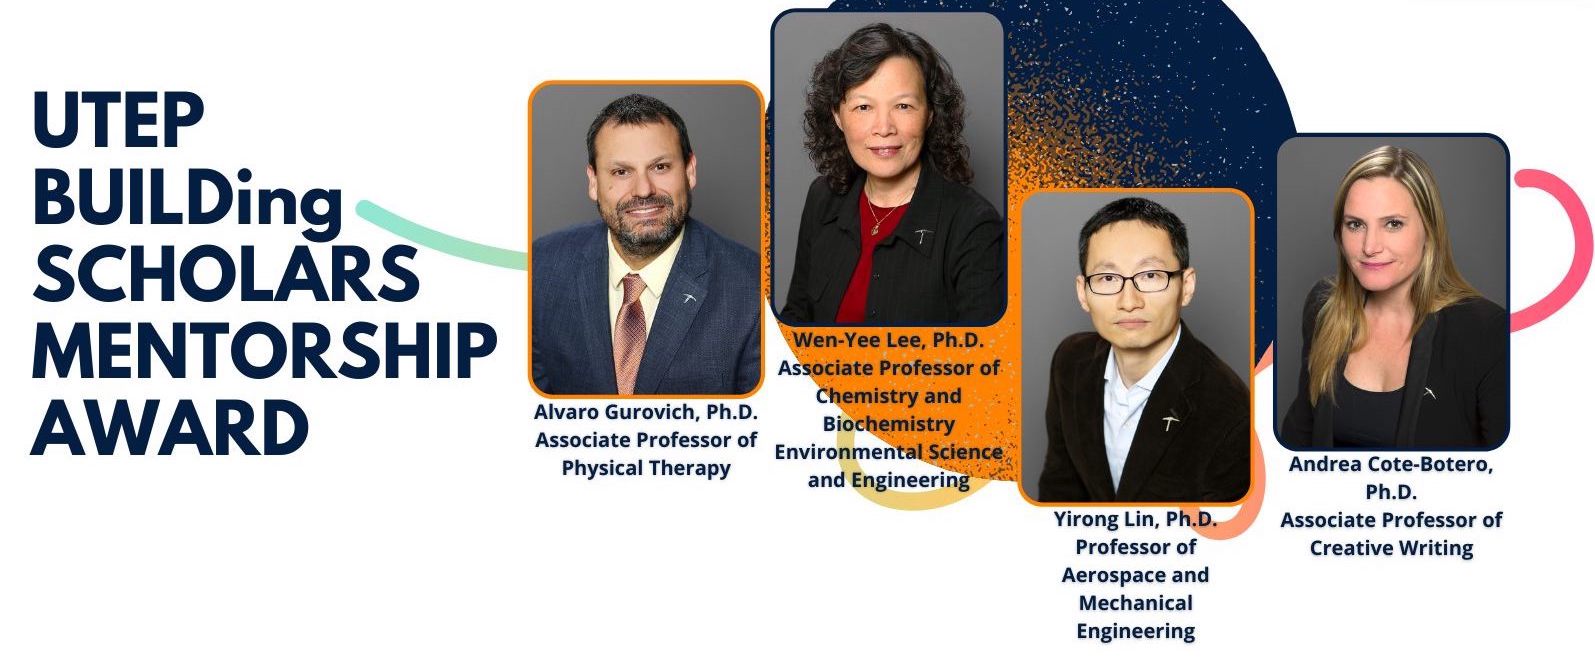 Dr. Lin recognized with the UTEP BUILDing SCHOLARS Mentorship Award 